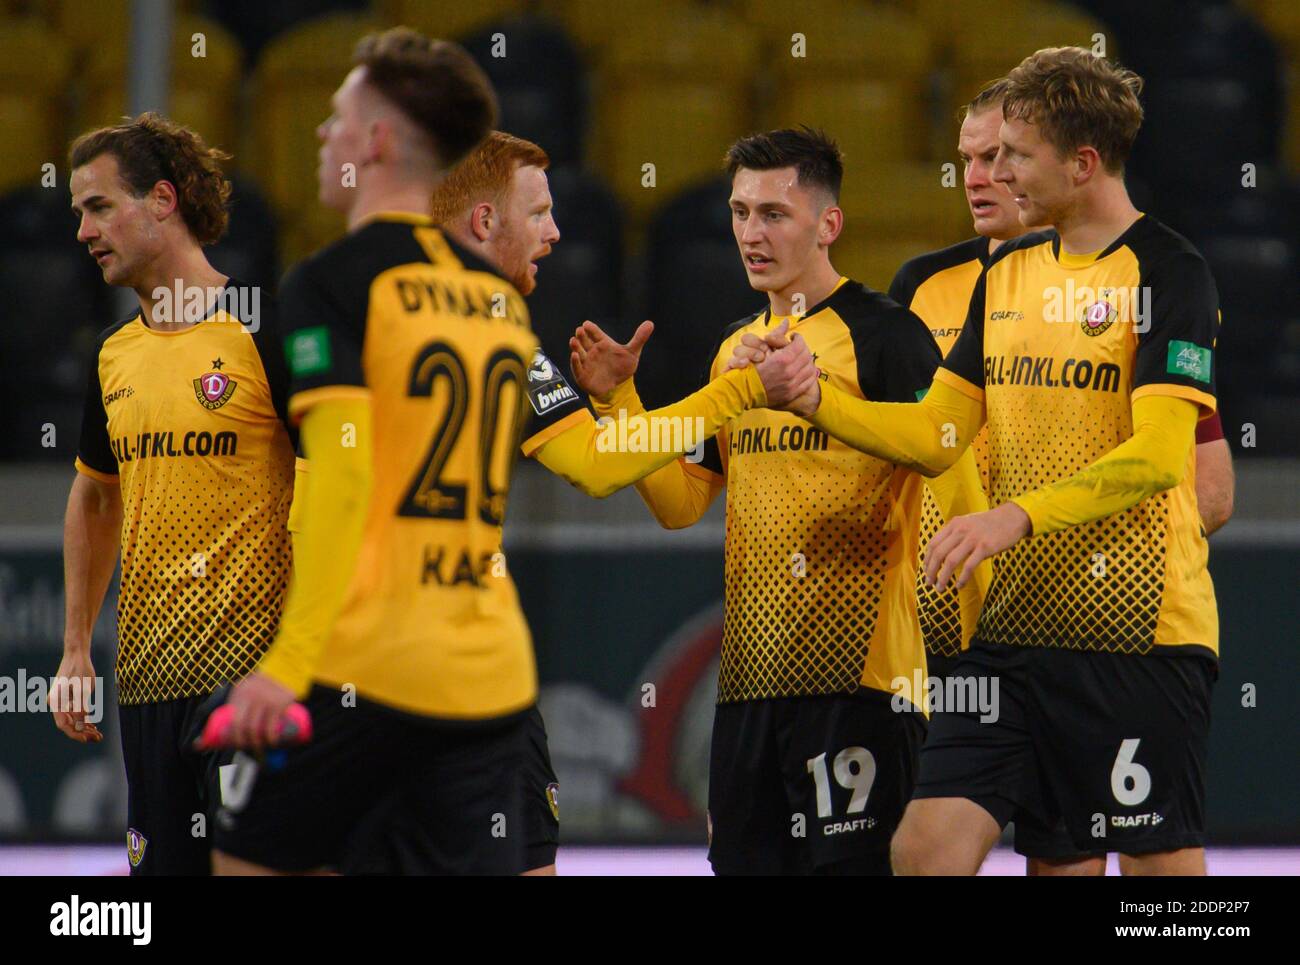 Dresden, Germany. 15th Nov, 2020. Football: 3rd division, SG Dynamo Dresden  - TSV 1860 Munich, 10th matchday, at the Rudolf-Harbig-Stadium Dynamos  Yannick Stark (3rd from left) cheers after his goal for 1:1